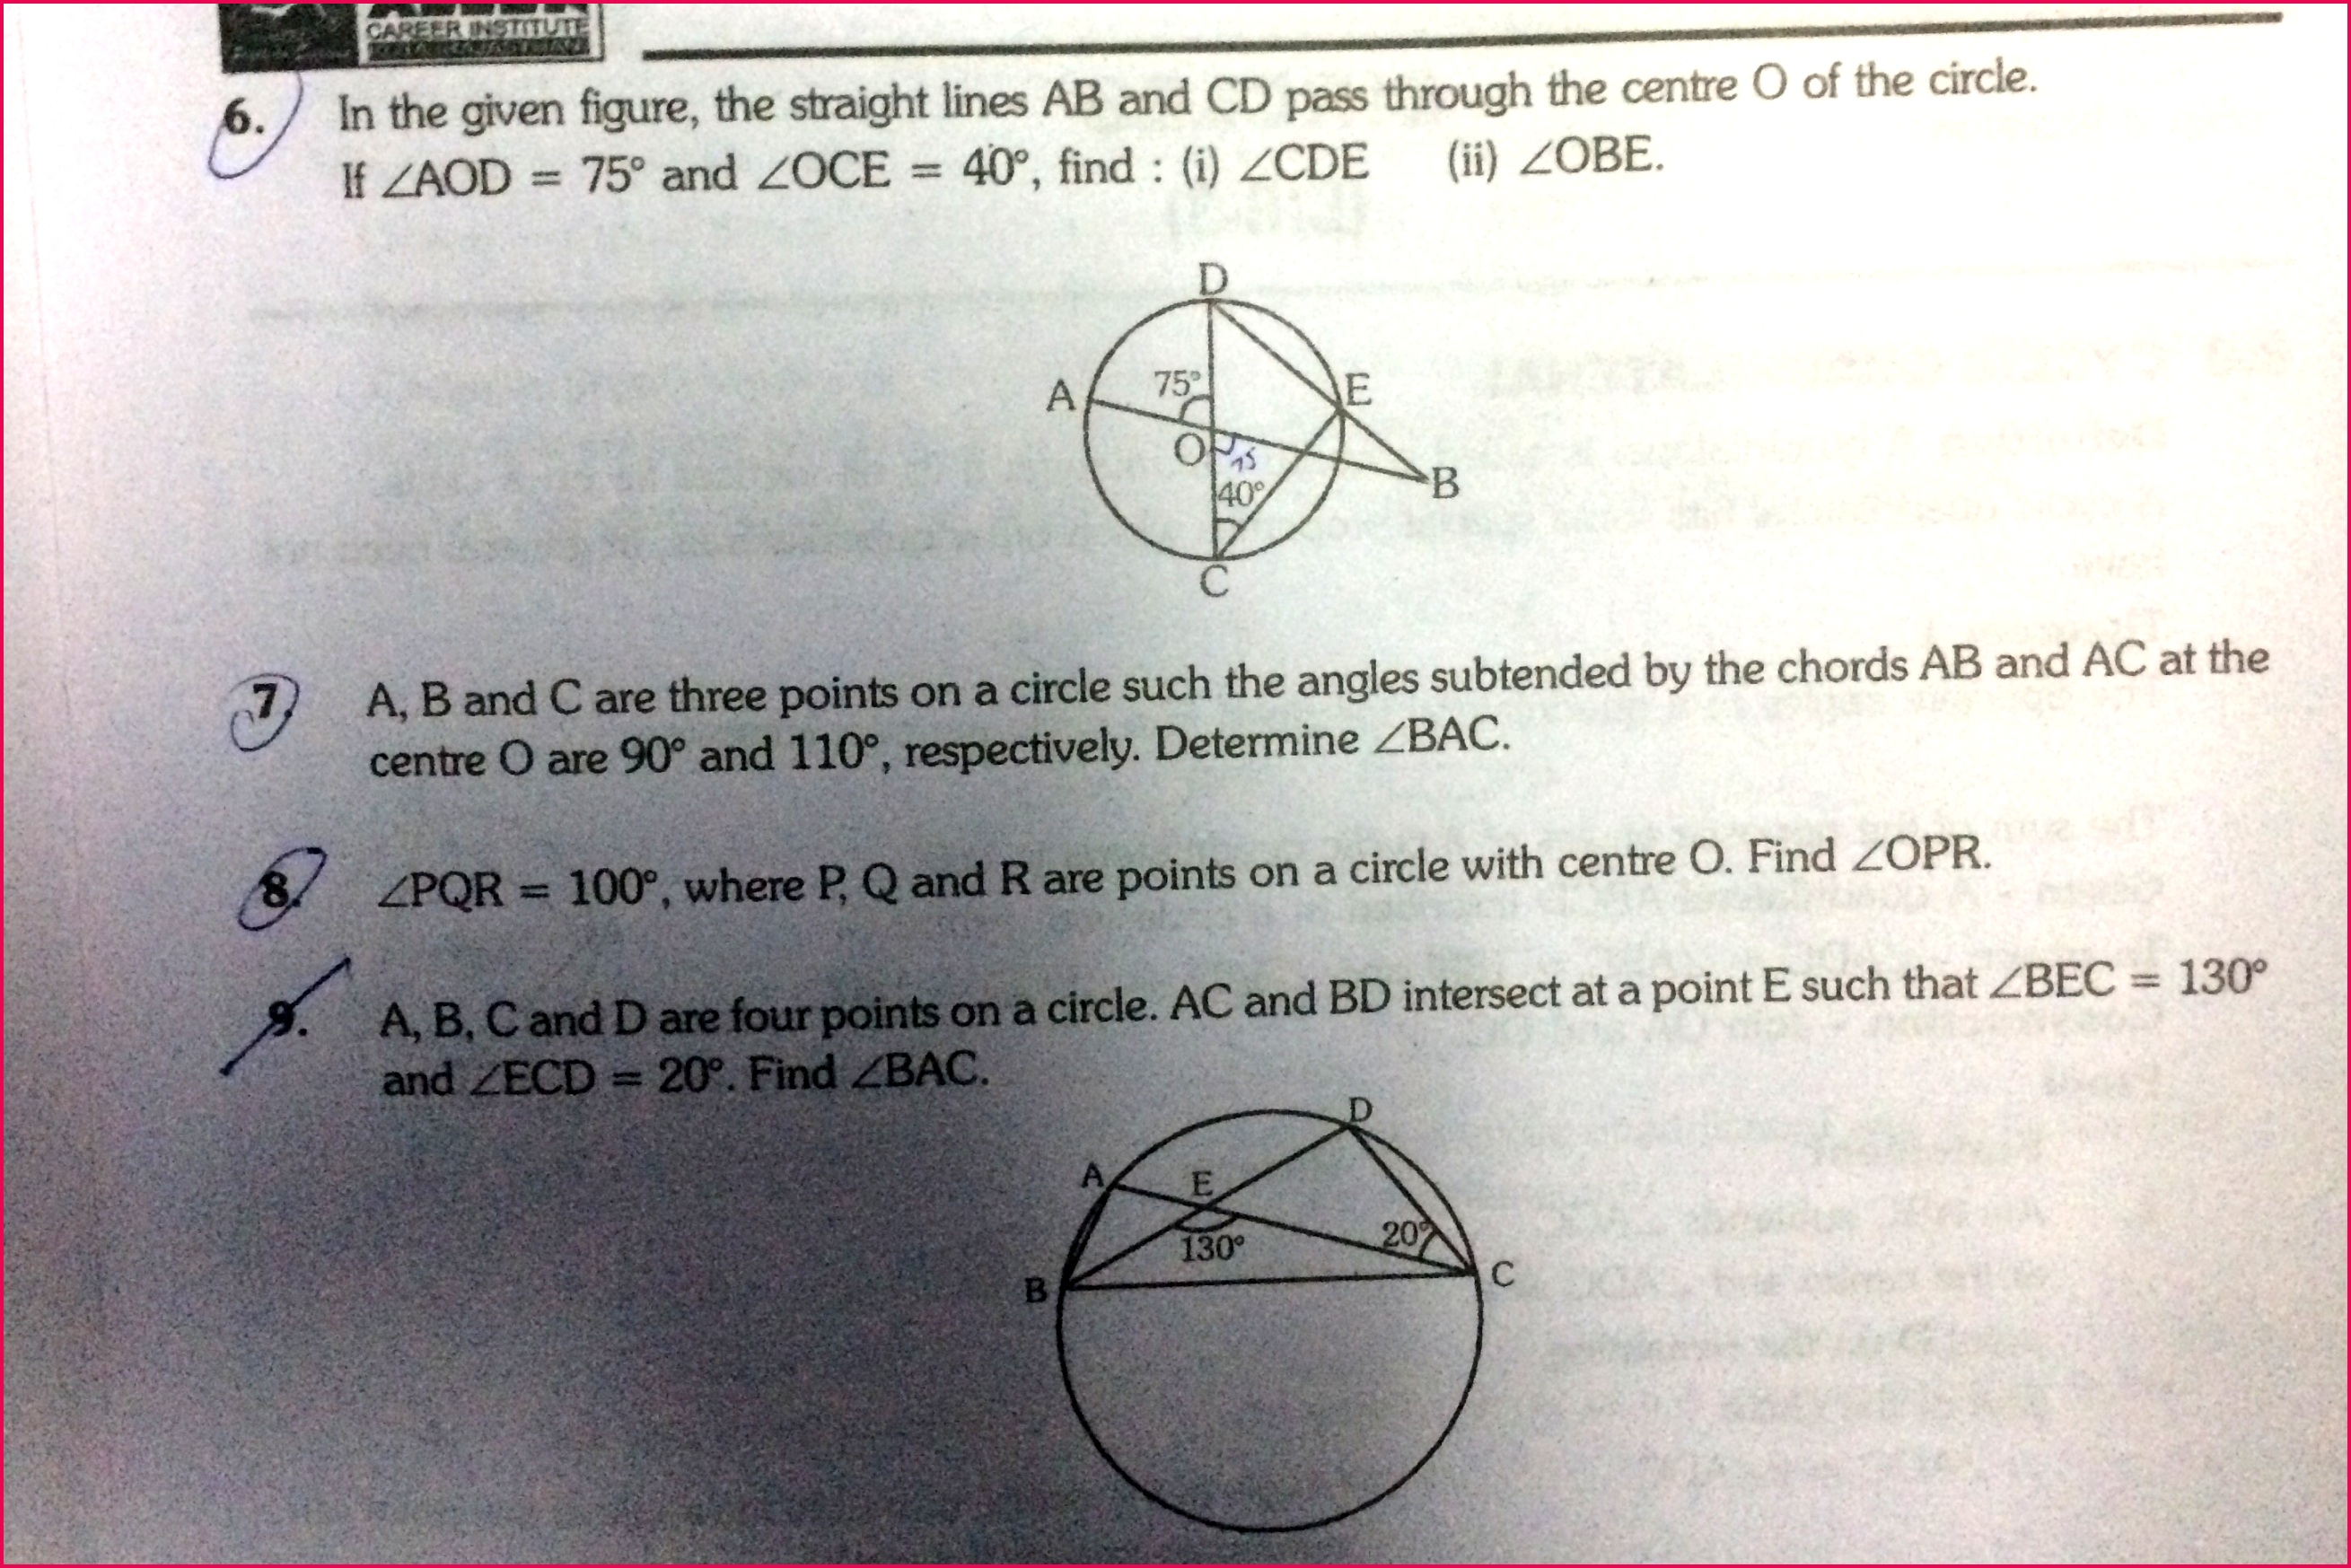 Please solve question no 7 with proper explanation